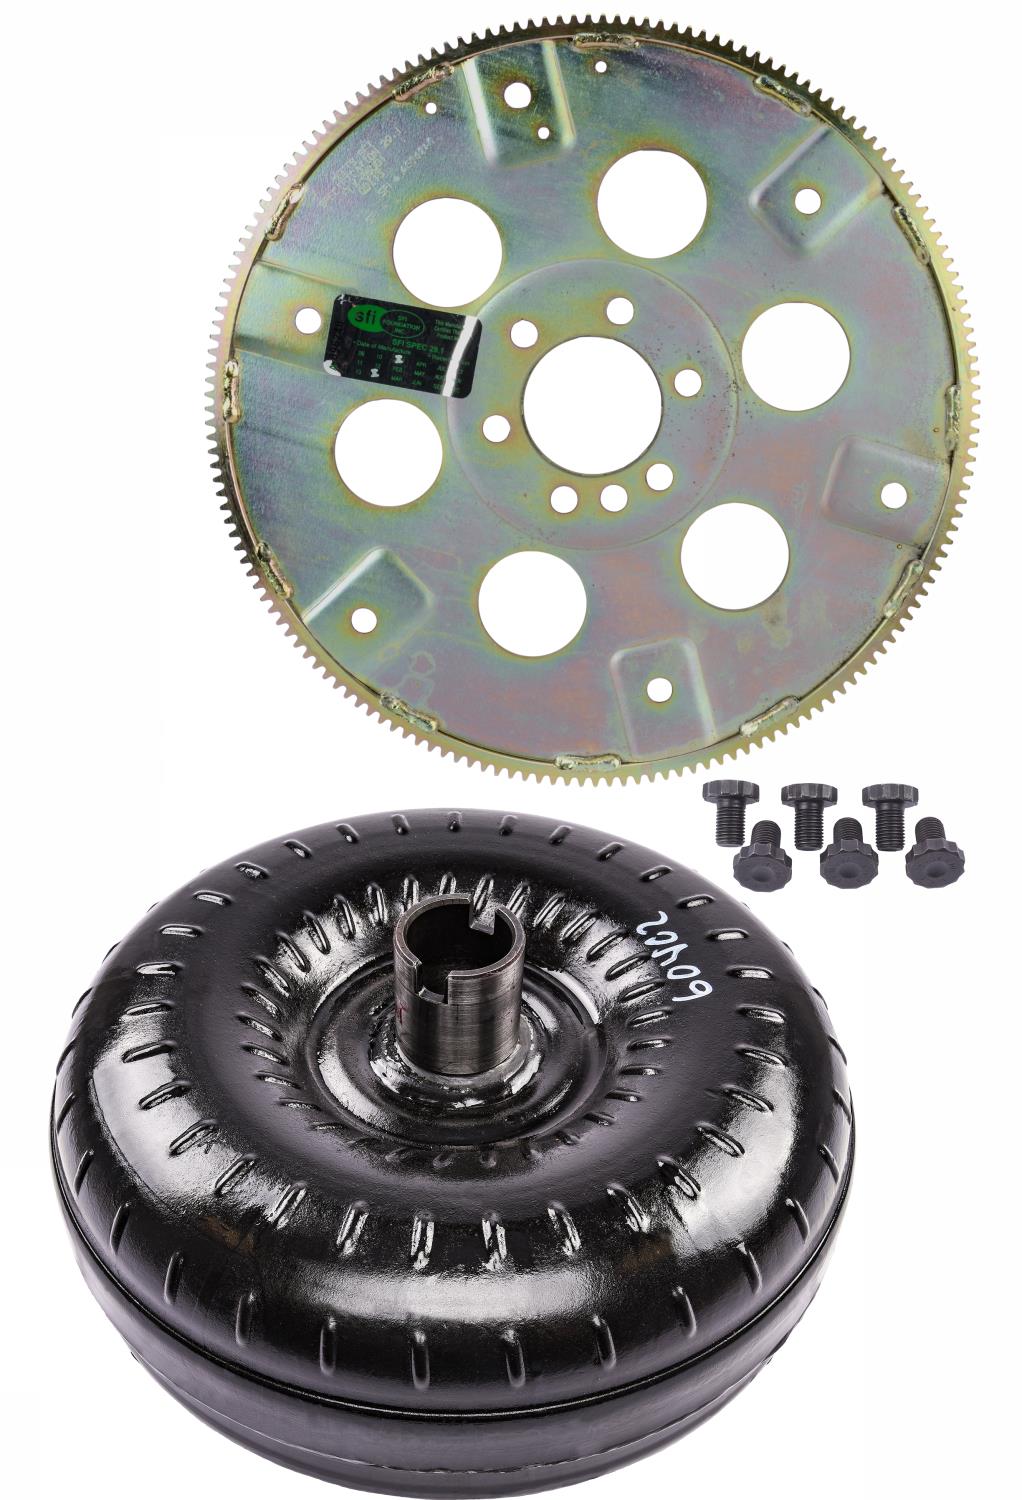 Torque Converter Kit for GM TH350/TH400 [2000-2300 RPM Stall Speed]